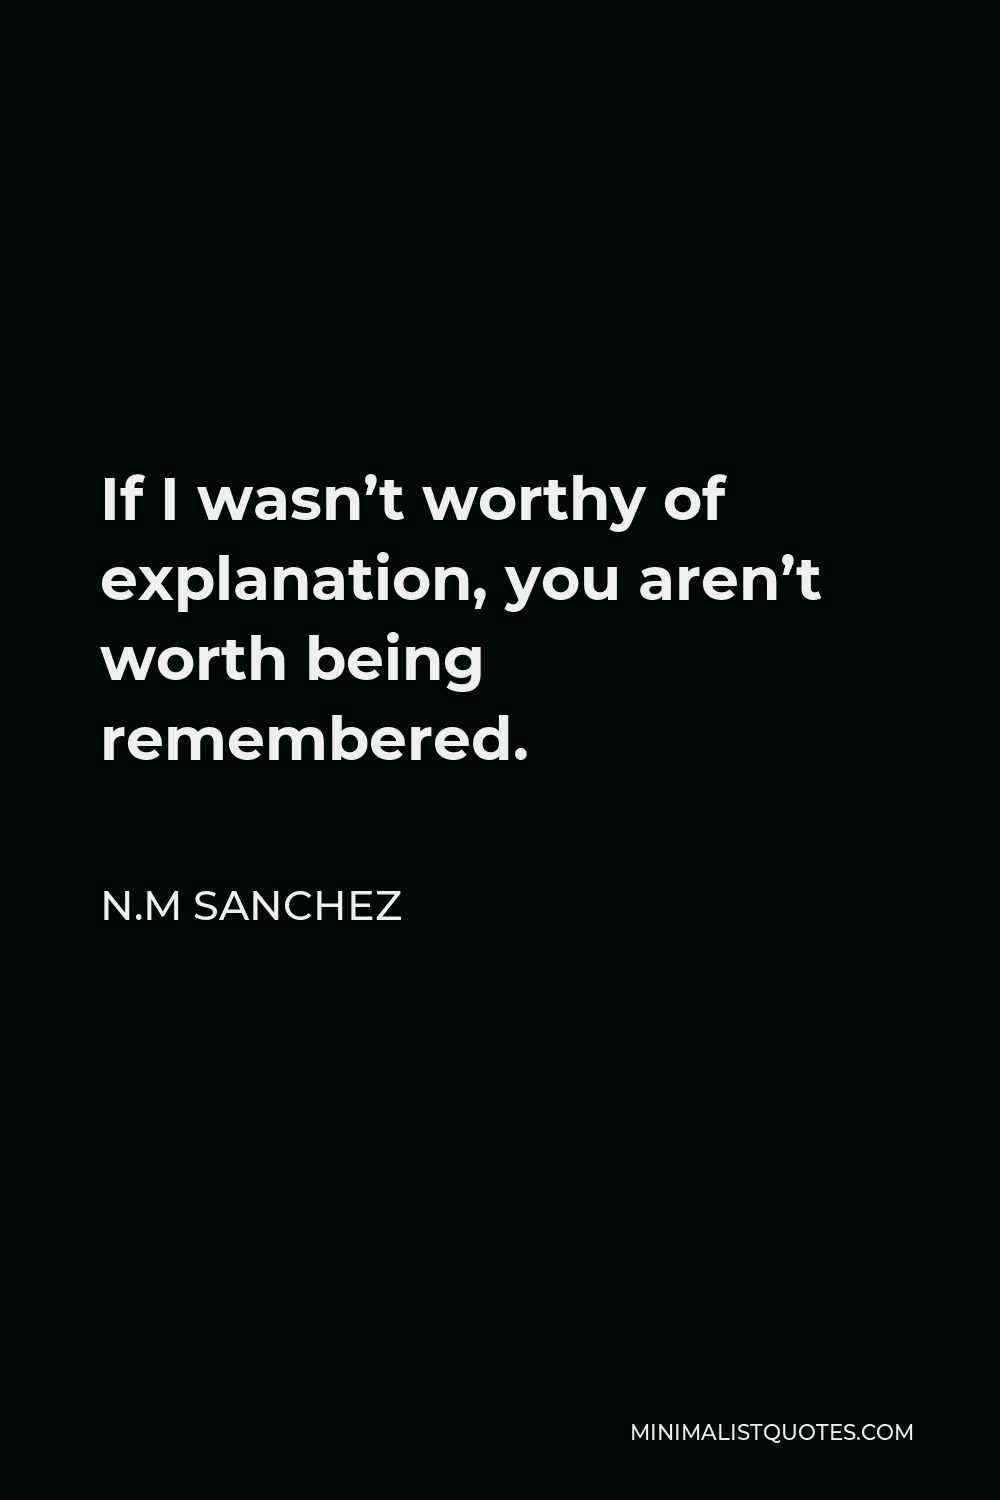 N.M Sanchez Quote - If I wasn’t worthy of explanation, you aren’t worth being remembered.